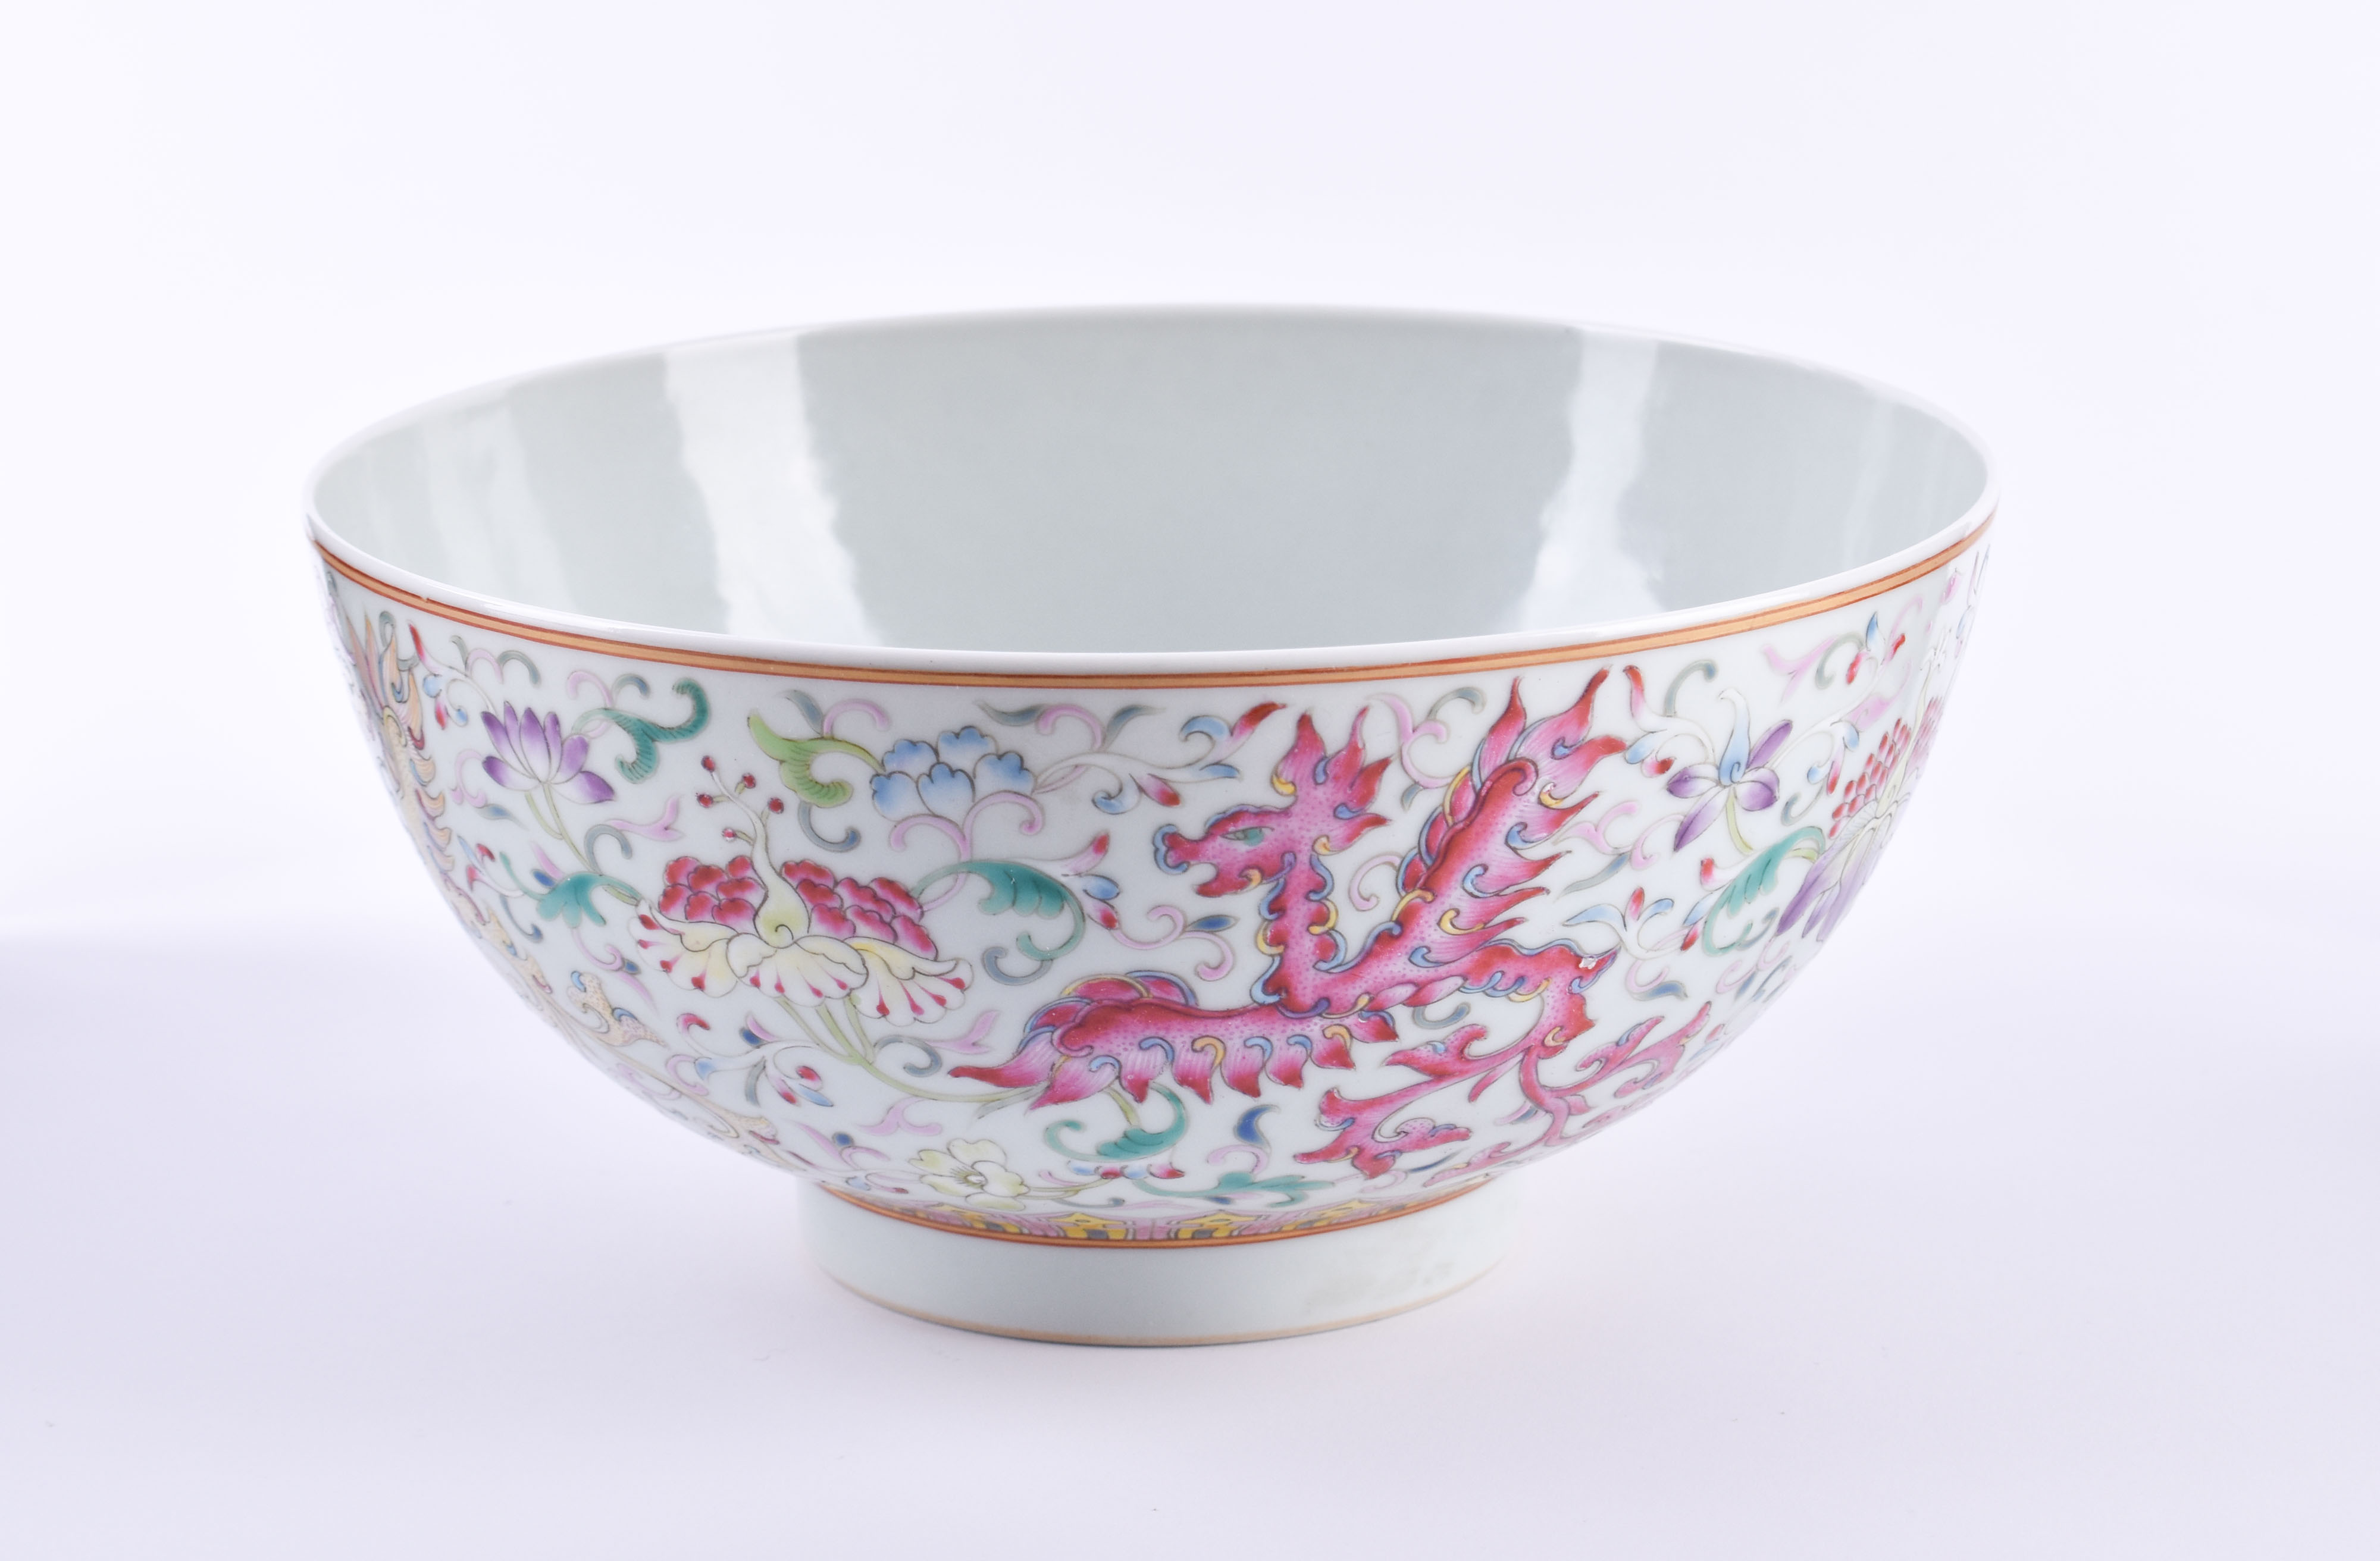  Famille Rose bowl China Qing dynasty - Image 2 of 10